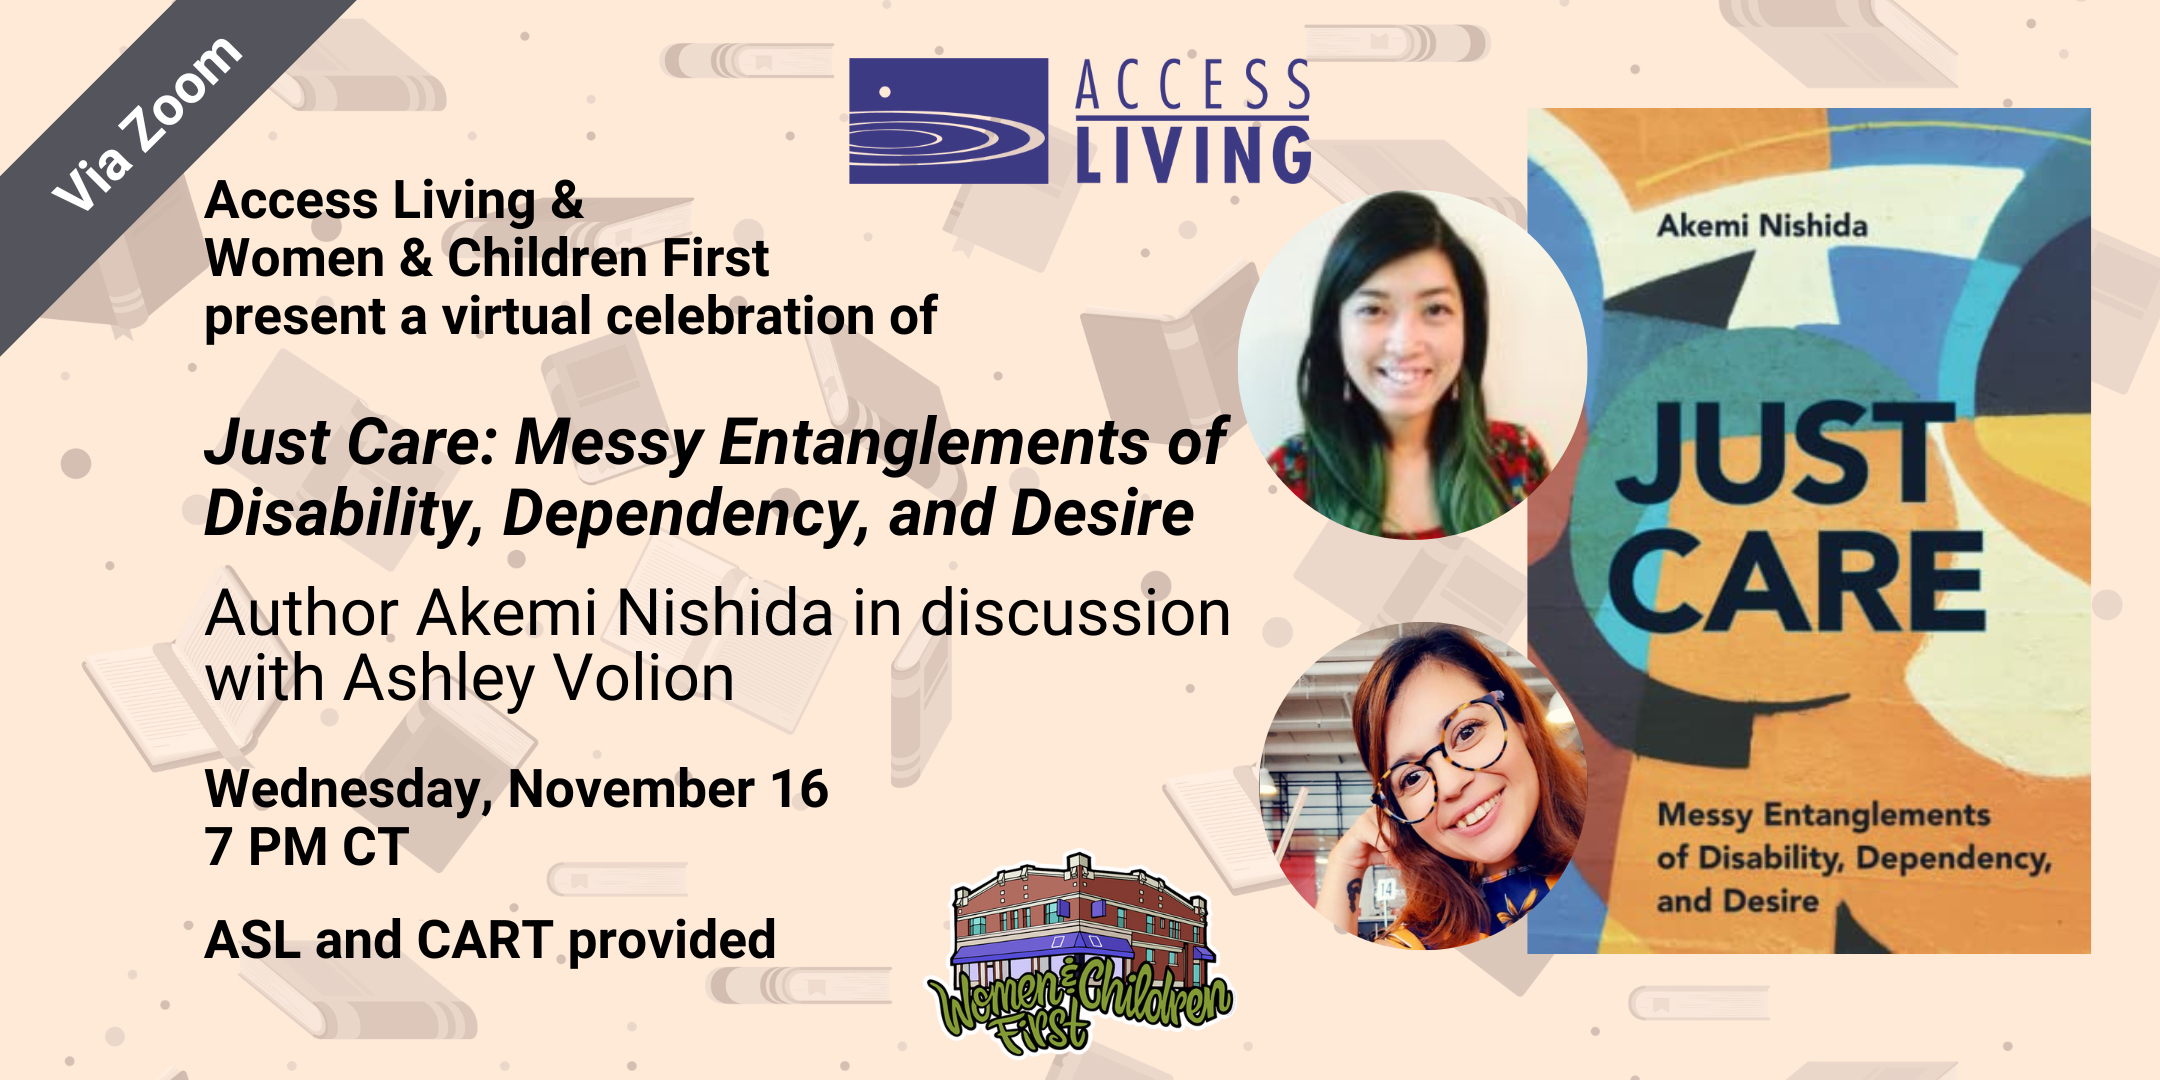 Graphic with Access Living and Women and Children First logos, pictures of Akemi Nishida and Ashley Volion, and the cover of the book Just Care. Text reads, "Access Living and Women and Children First present a virtual celebration of "Just Care: Messy Entanglements of Disability, Dependency, and Desire" Author Akemi Nishida in discussion with Ashley Volion. Wednesday, November 16, 7PM CT, ASL and CART provided."